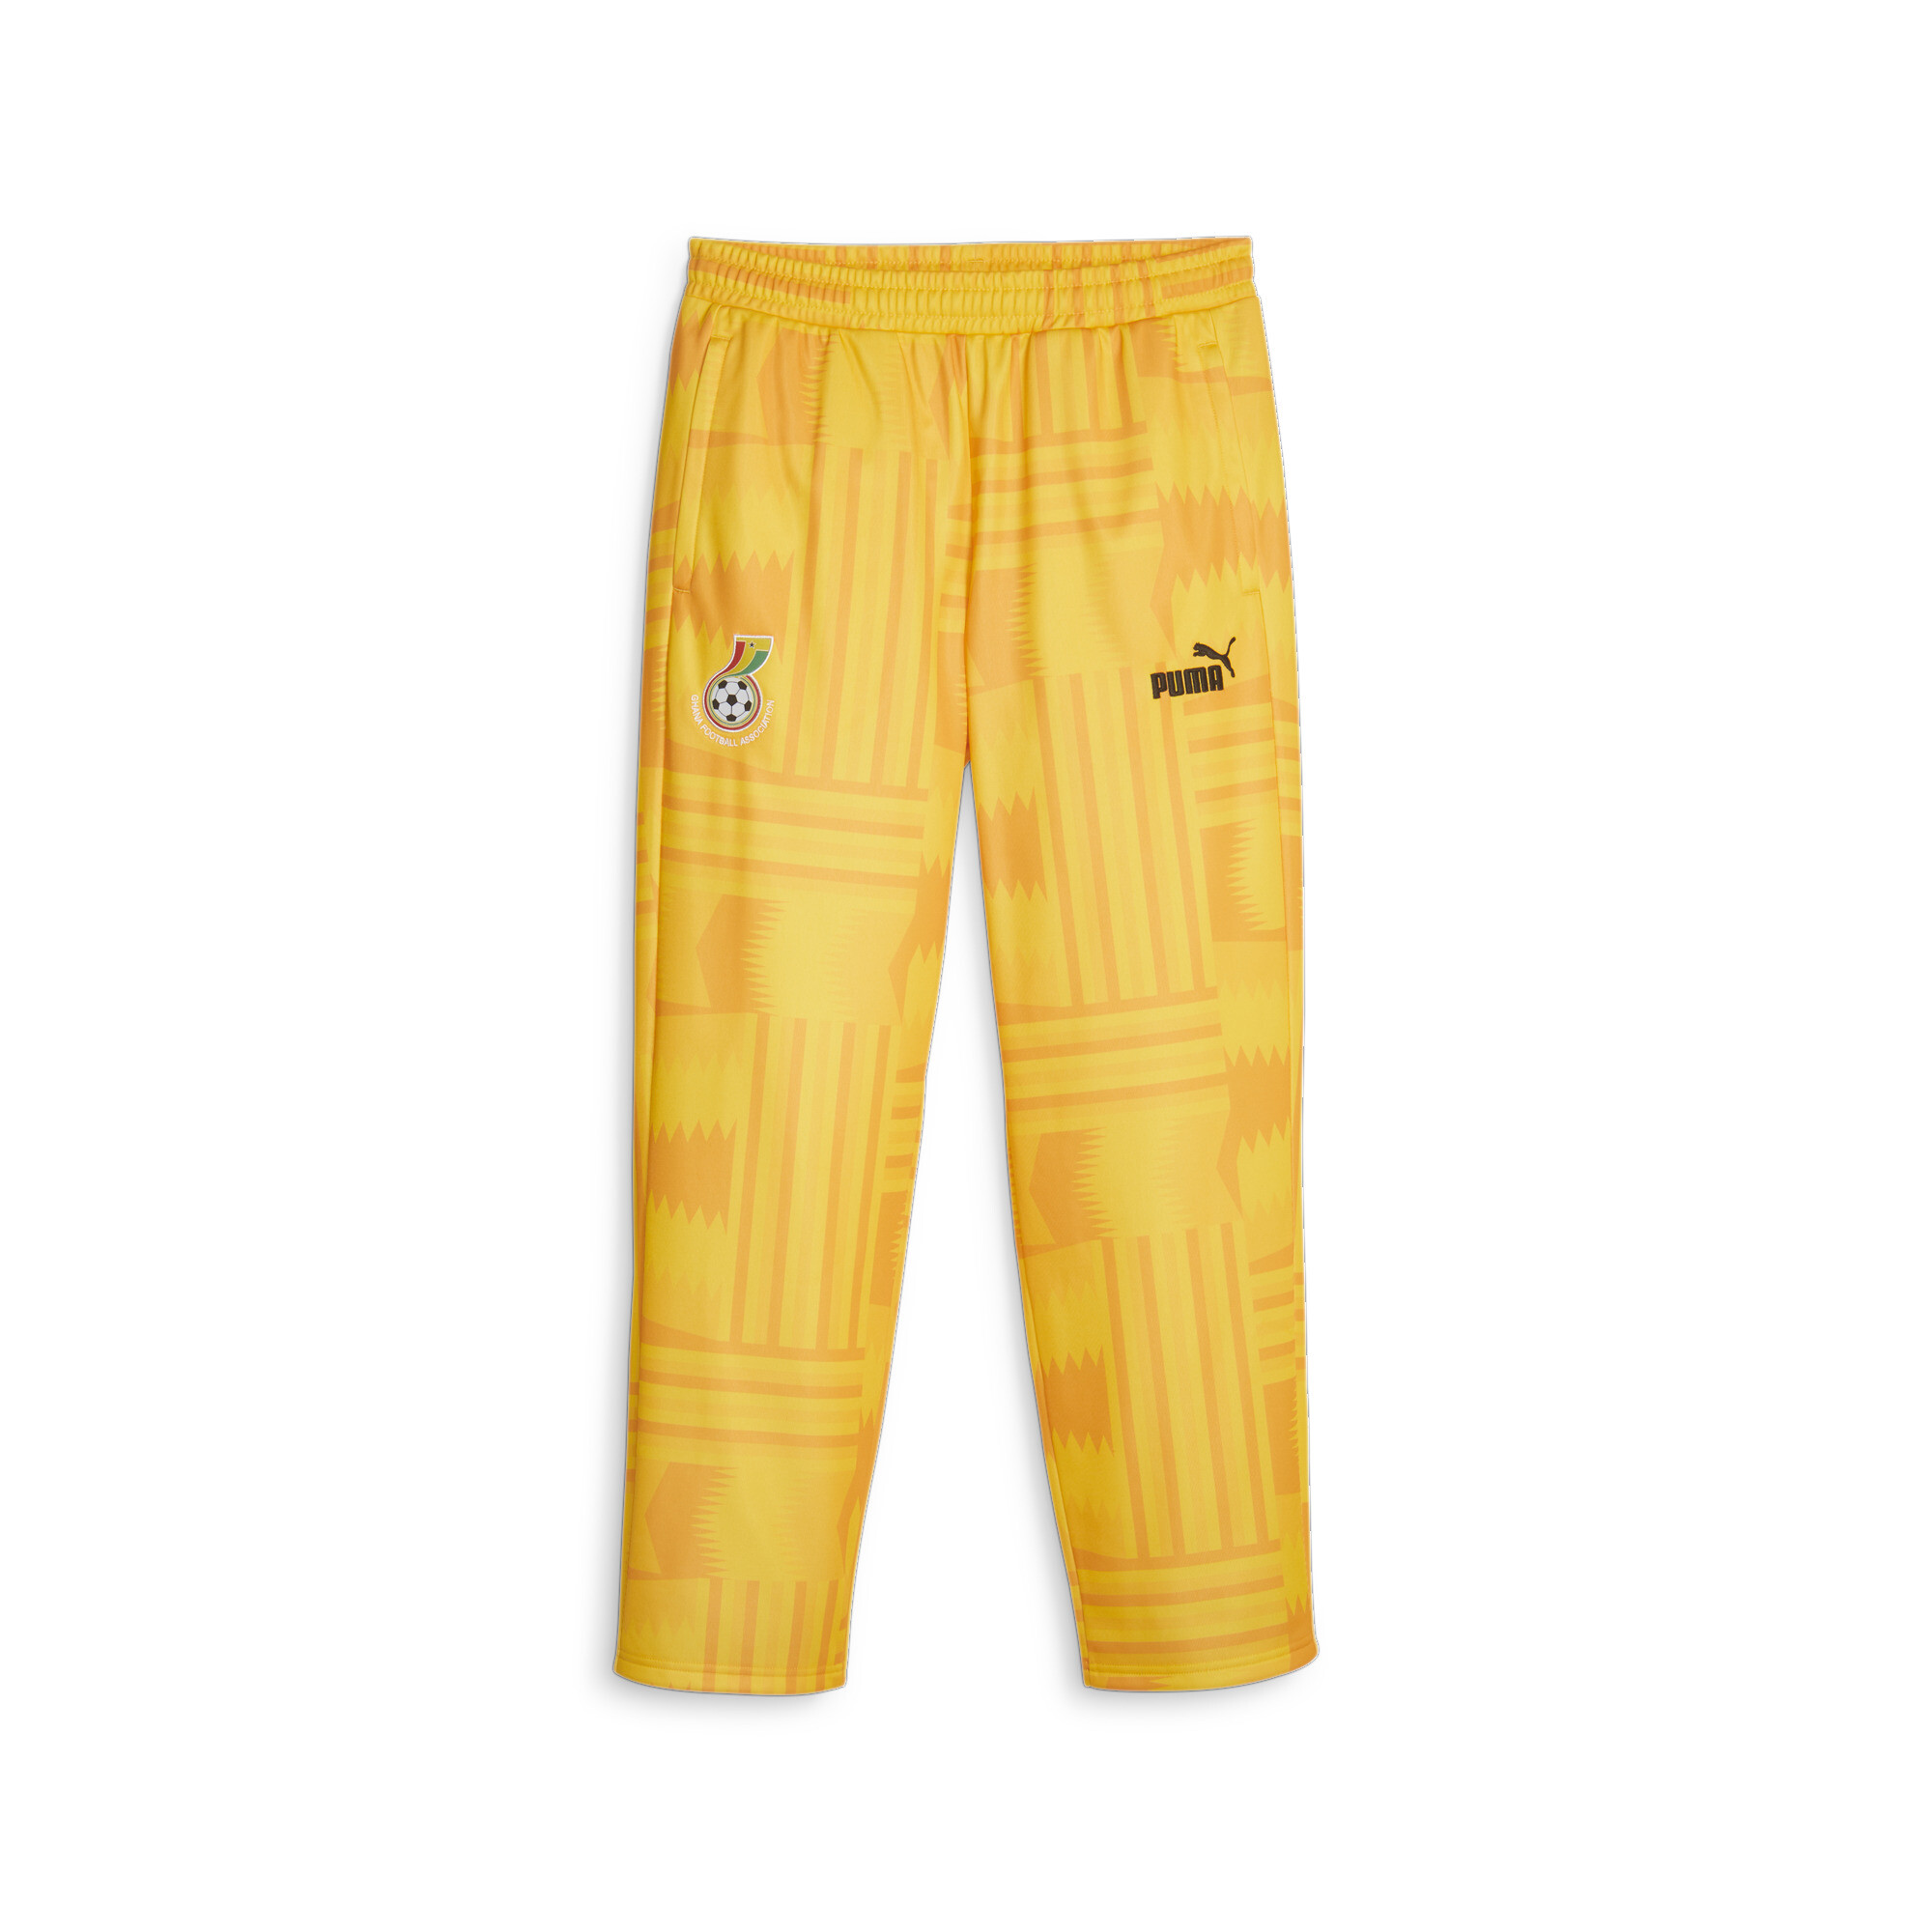 Men's PUMA Ghana FtblCulture Track Pants In Yellow, Size XL